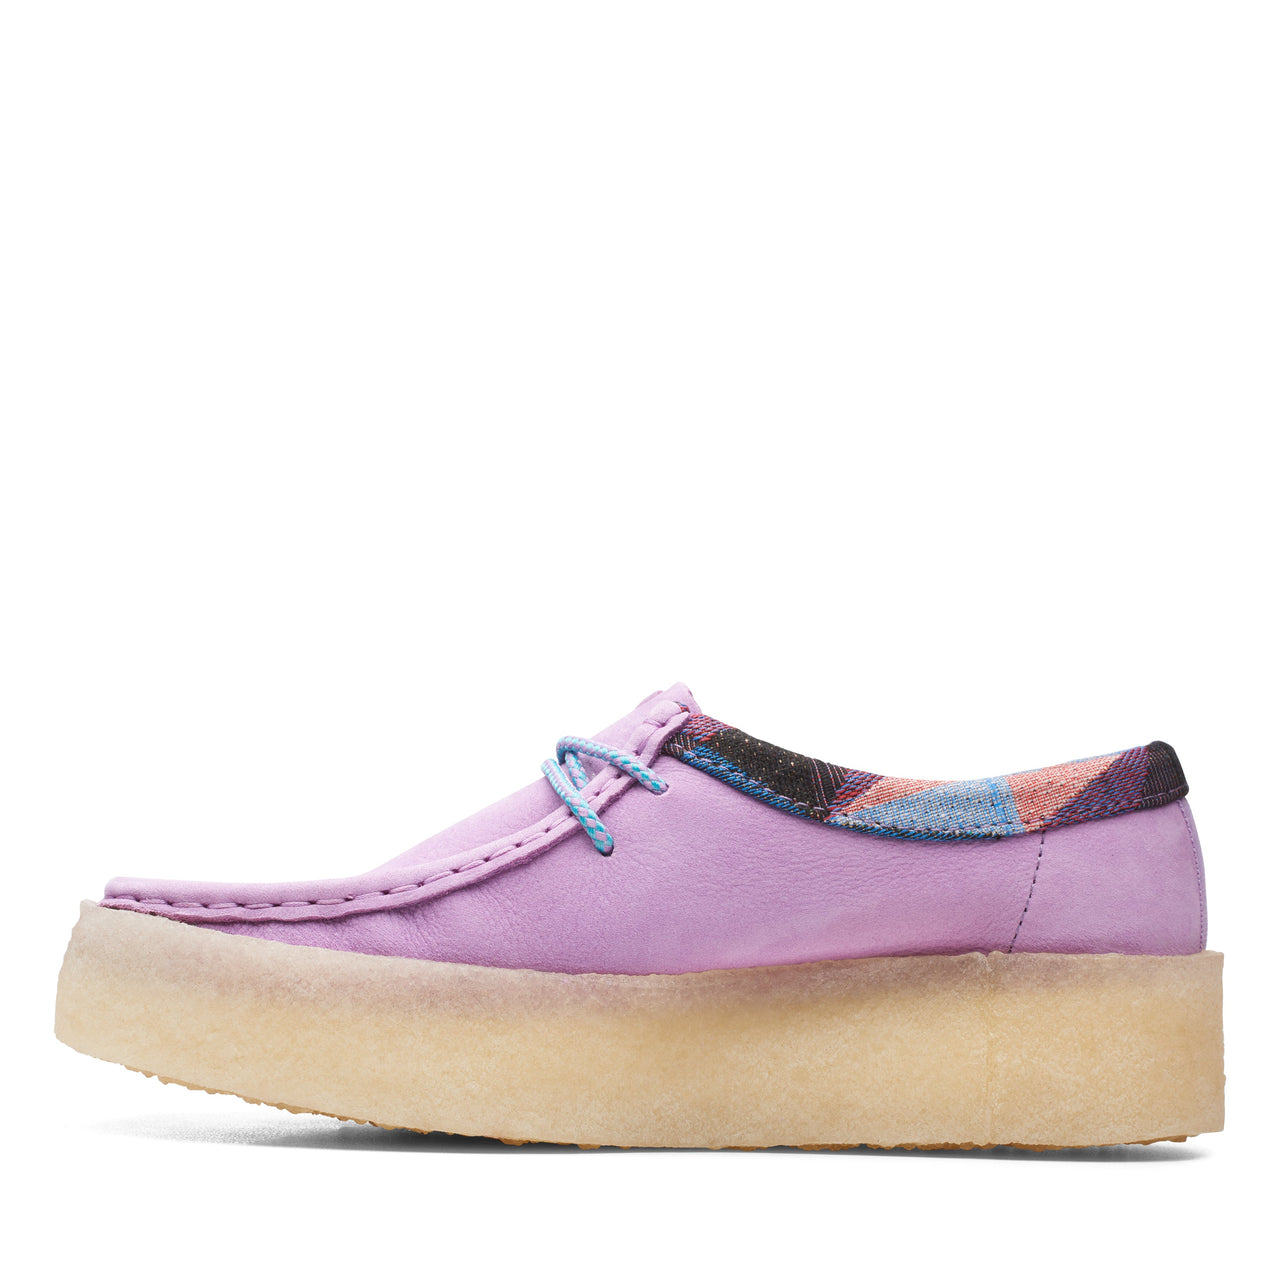  Fashionable light purple Clarks Women Wallabee Cup Shoes for everyday wear